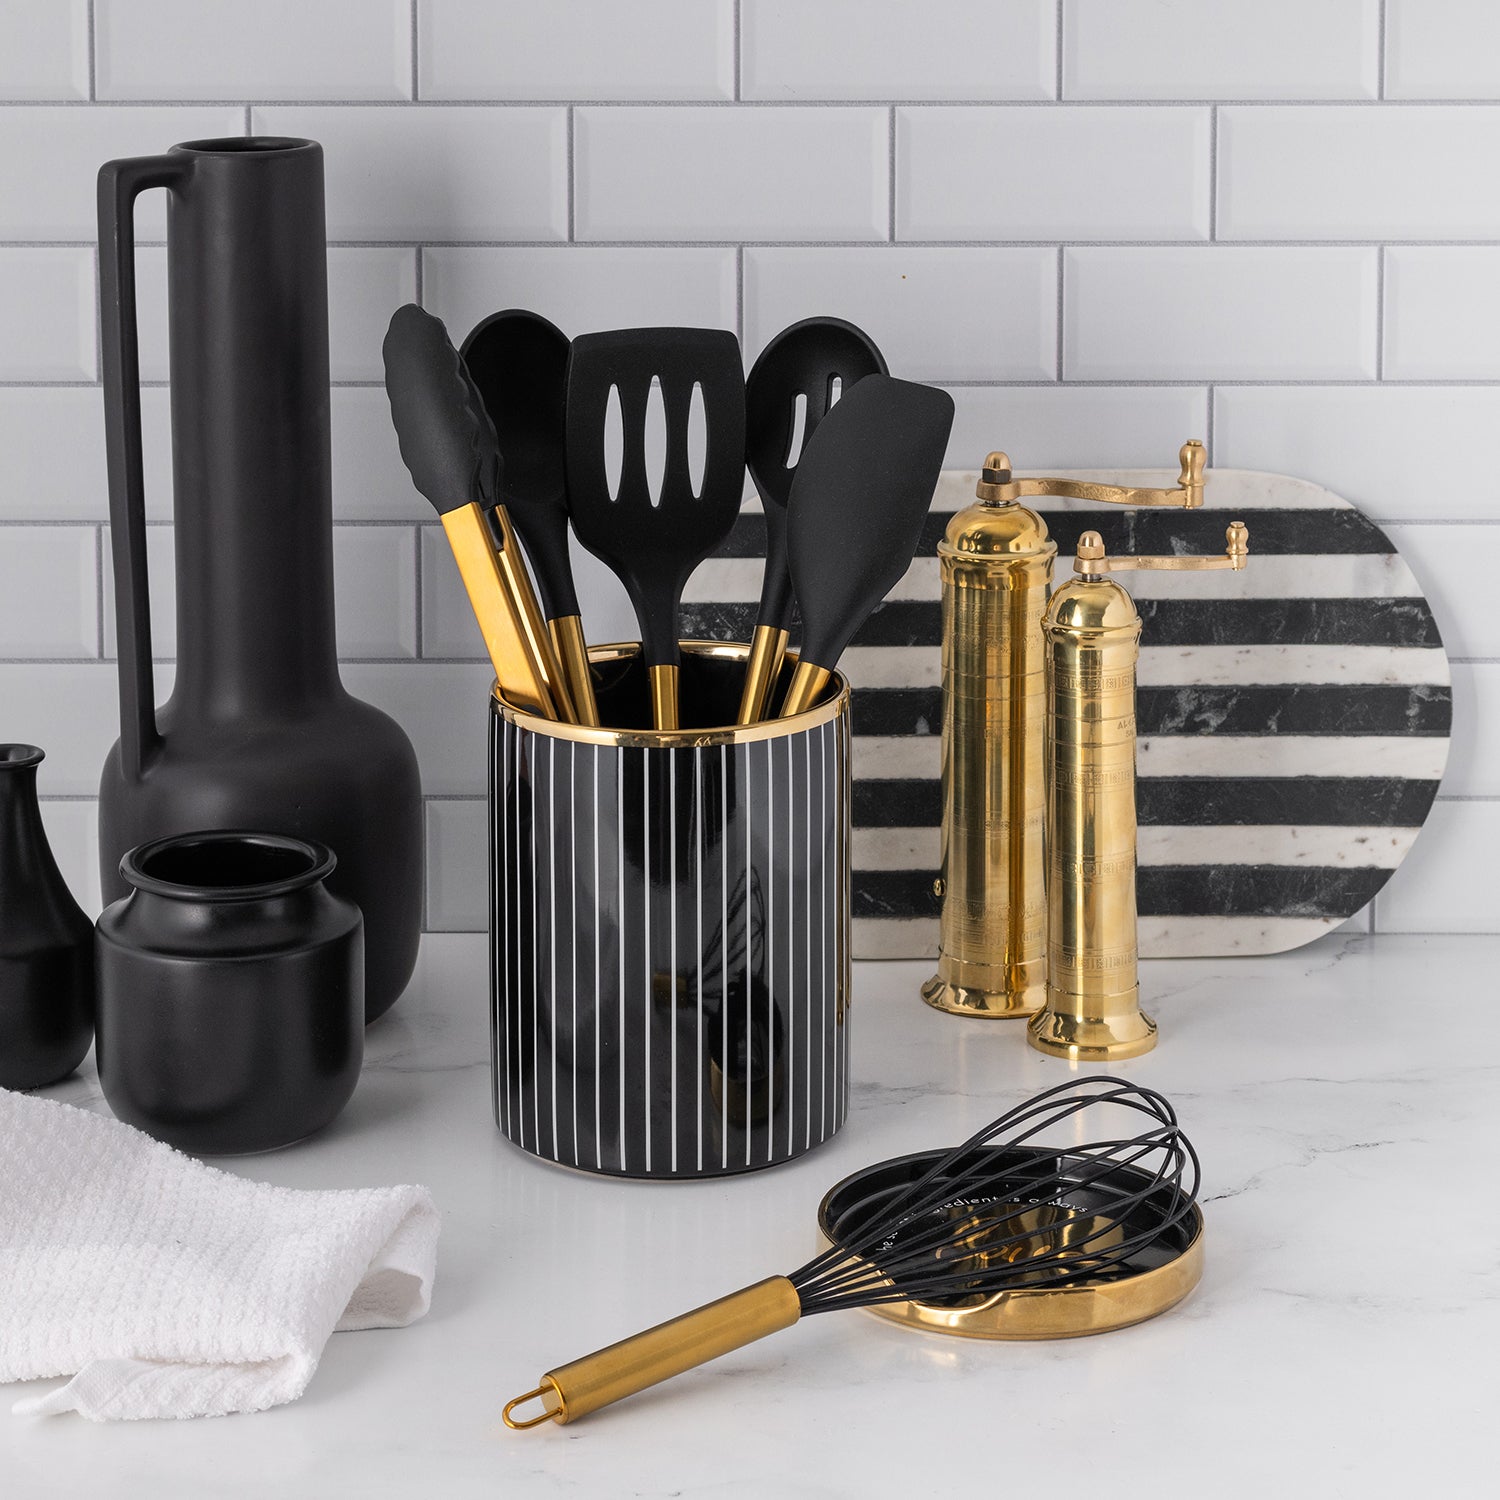 Black and Gold Kitchen Utensils Set - Styled Settings